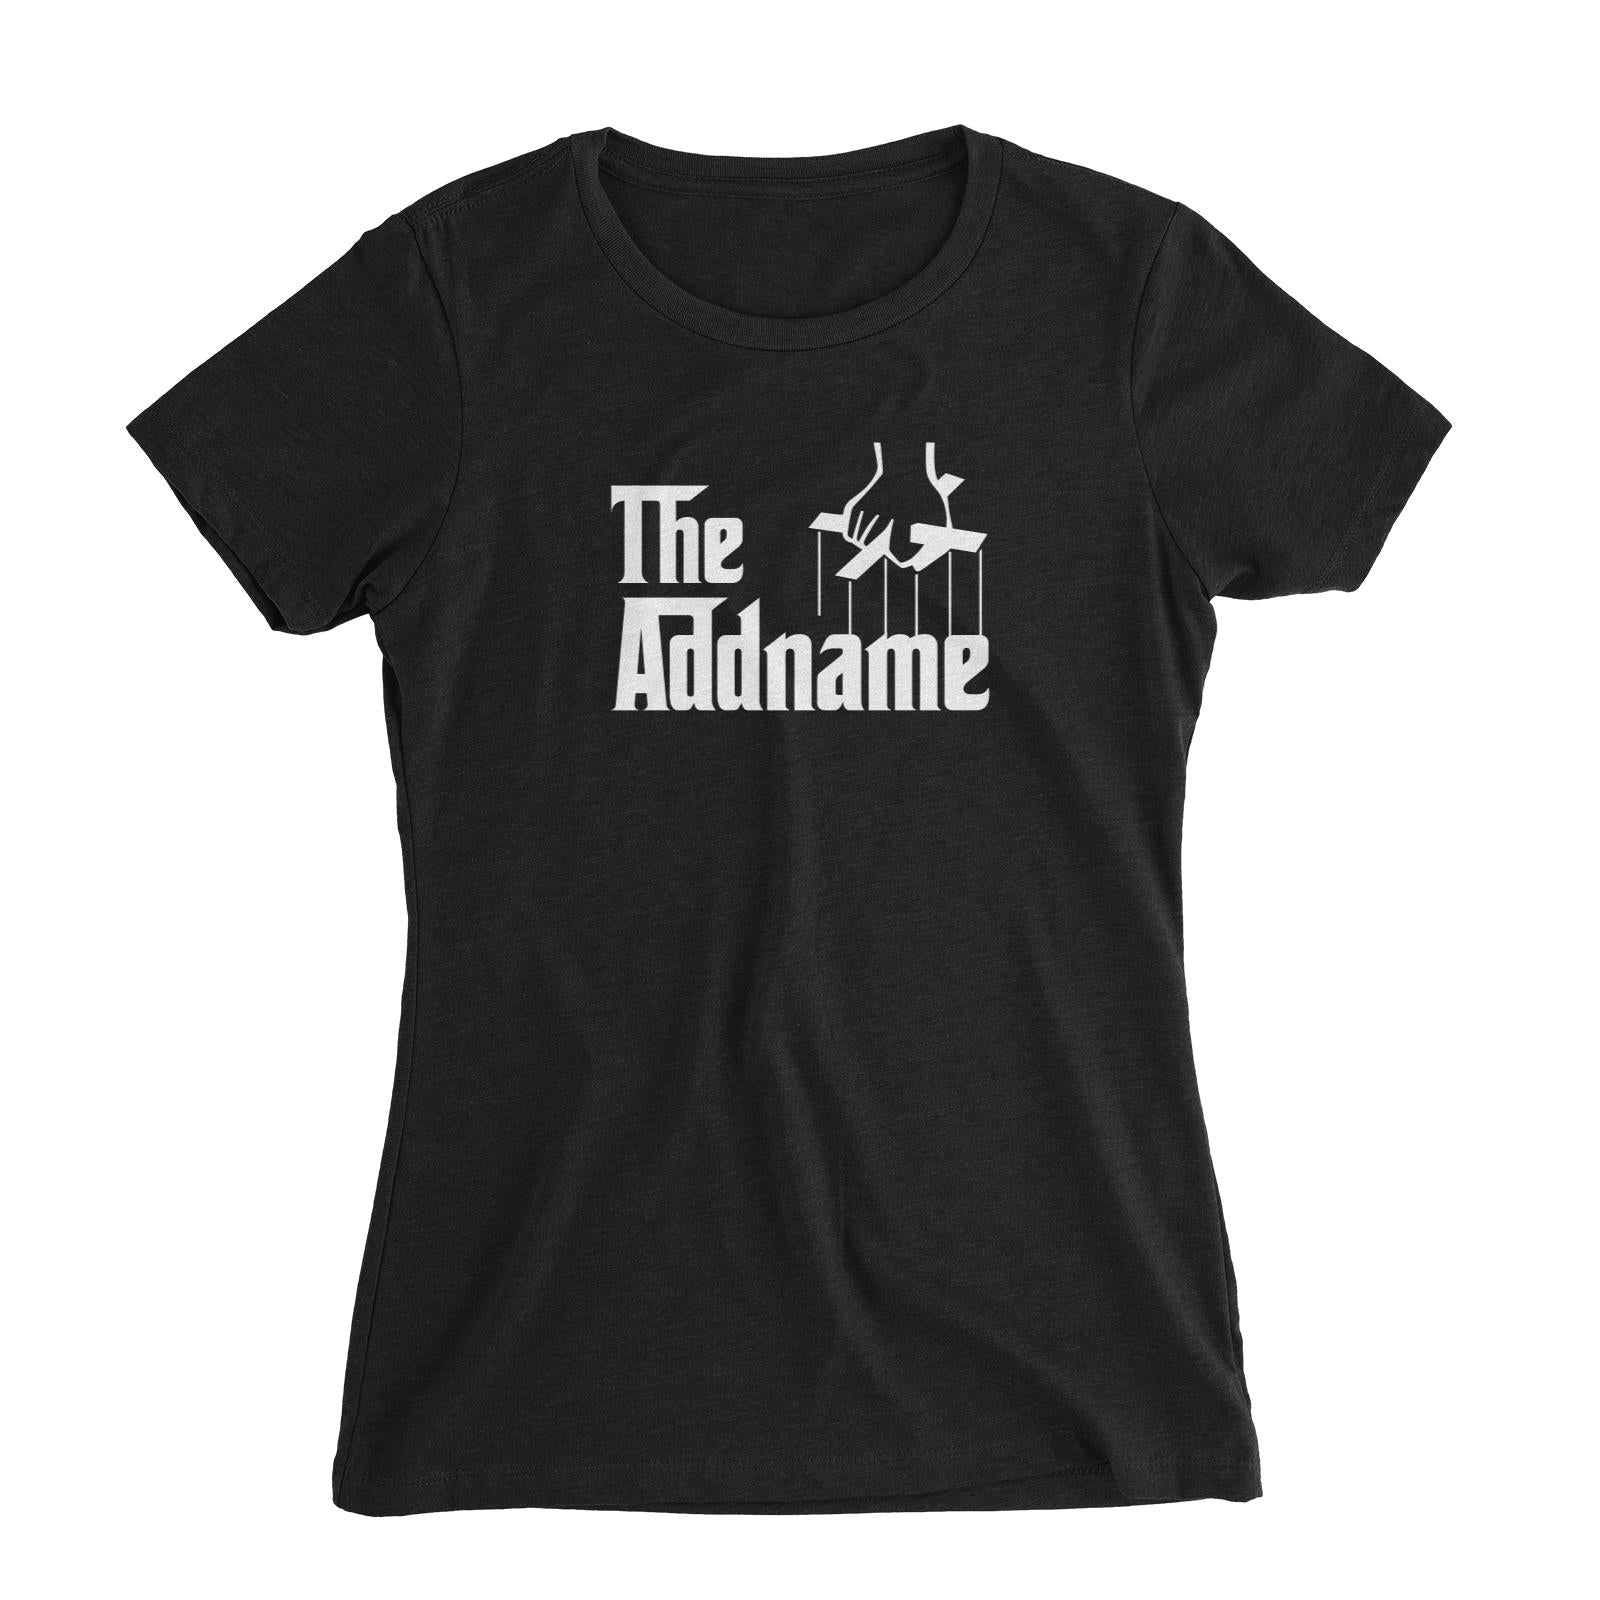 The Addname Women's Slim Fit T-Shirt Godfather Matching Family Personalizable Designs